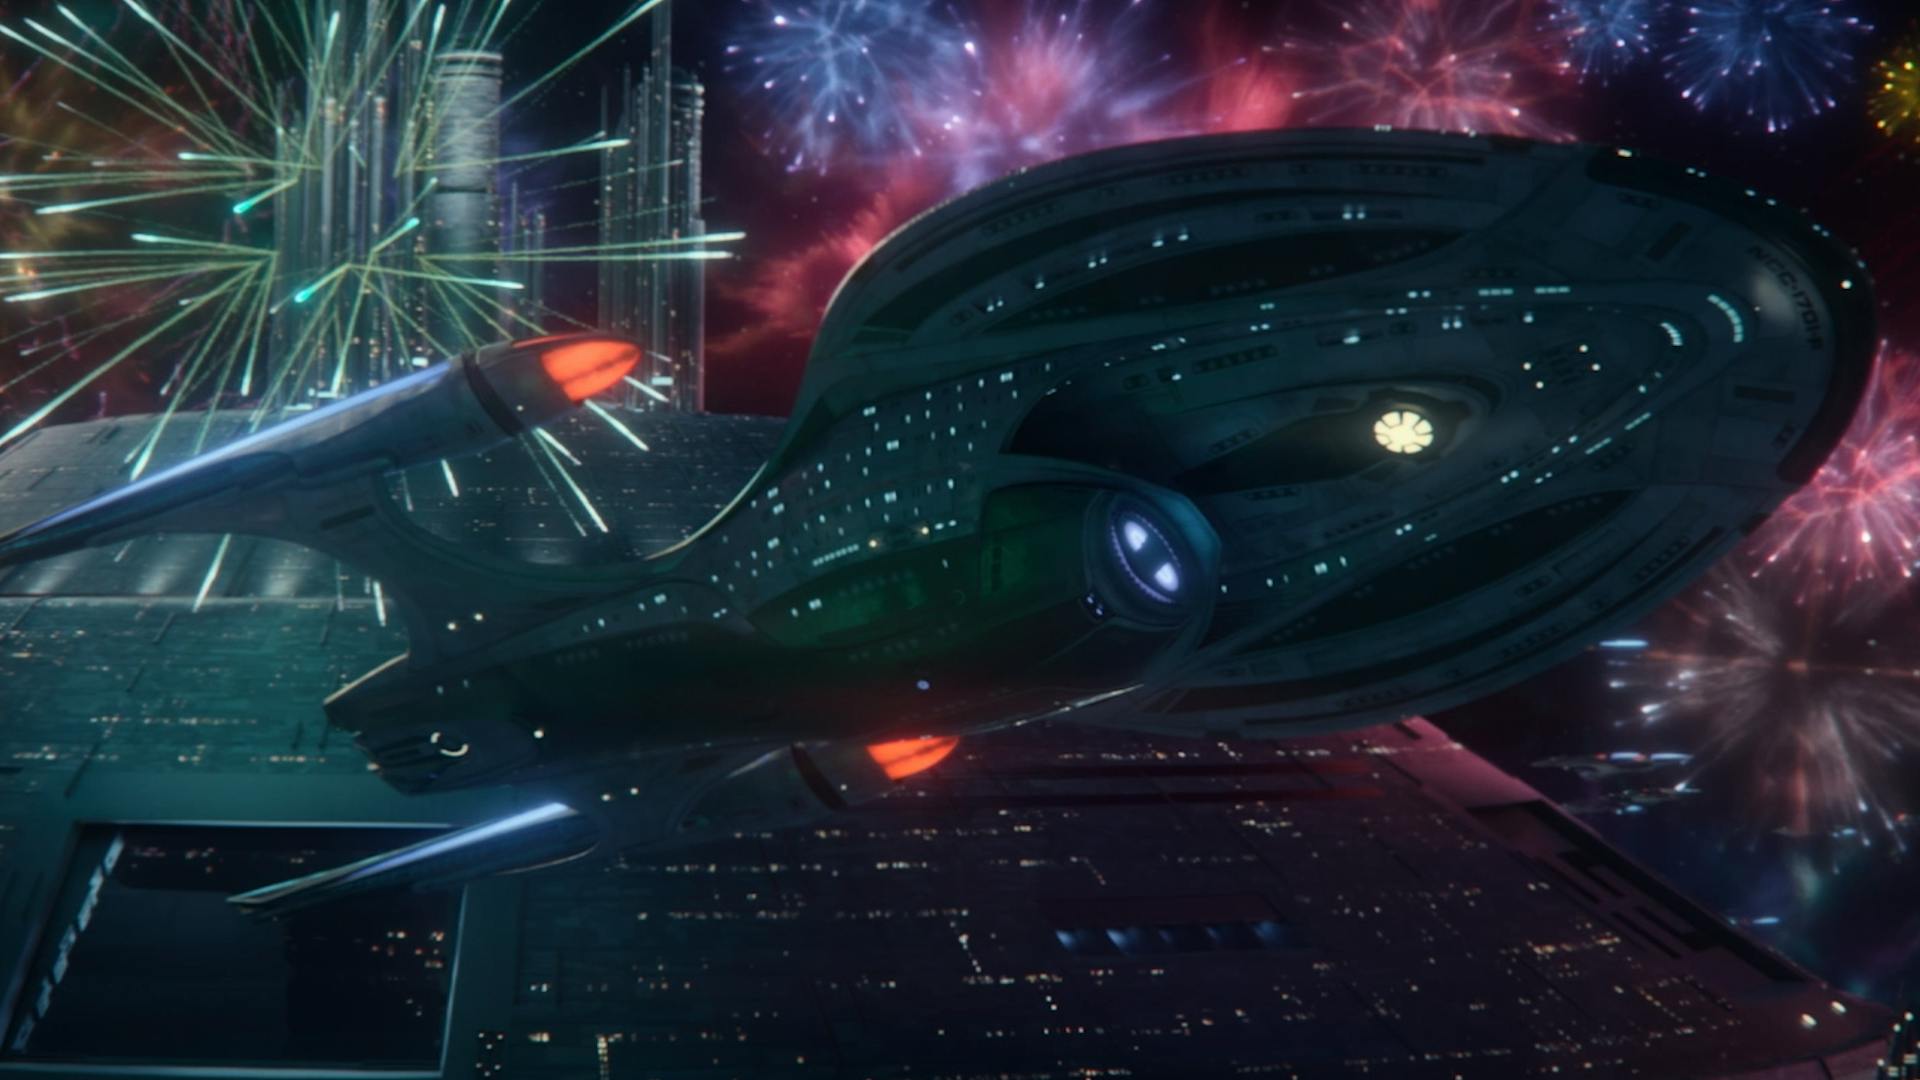 The NCC-1701-F leaving spacedock for ceremonial departure on Frontier Day